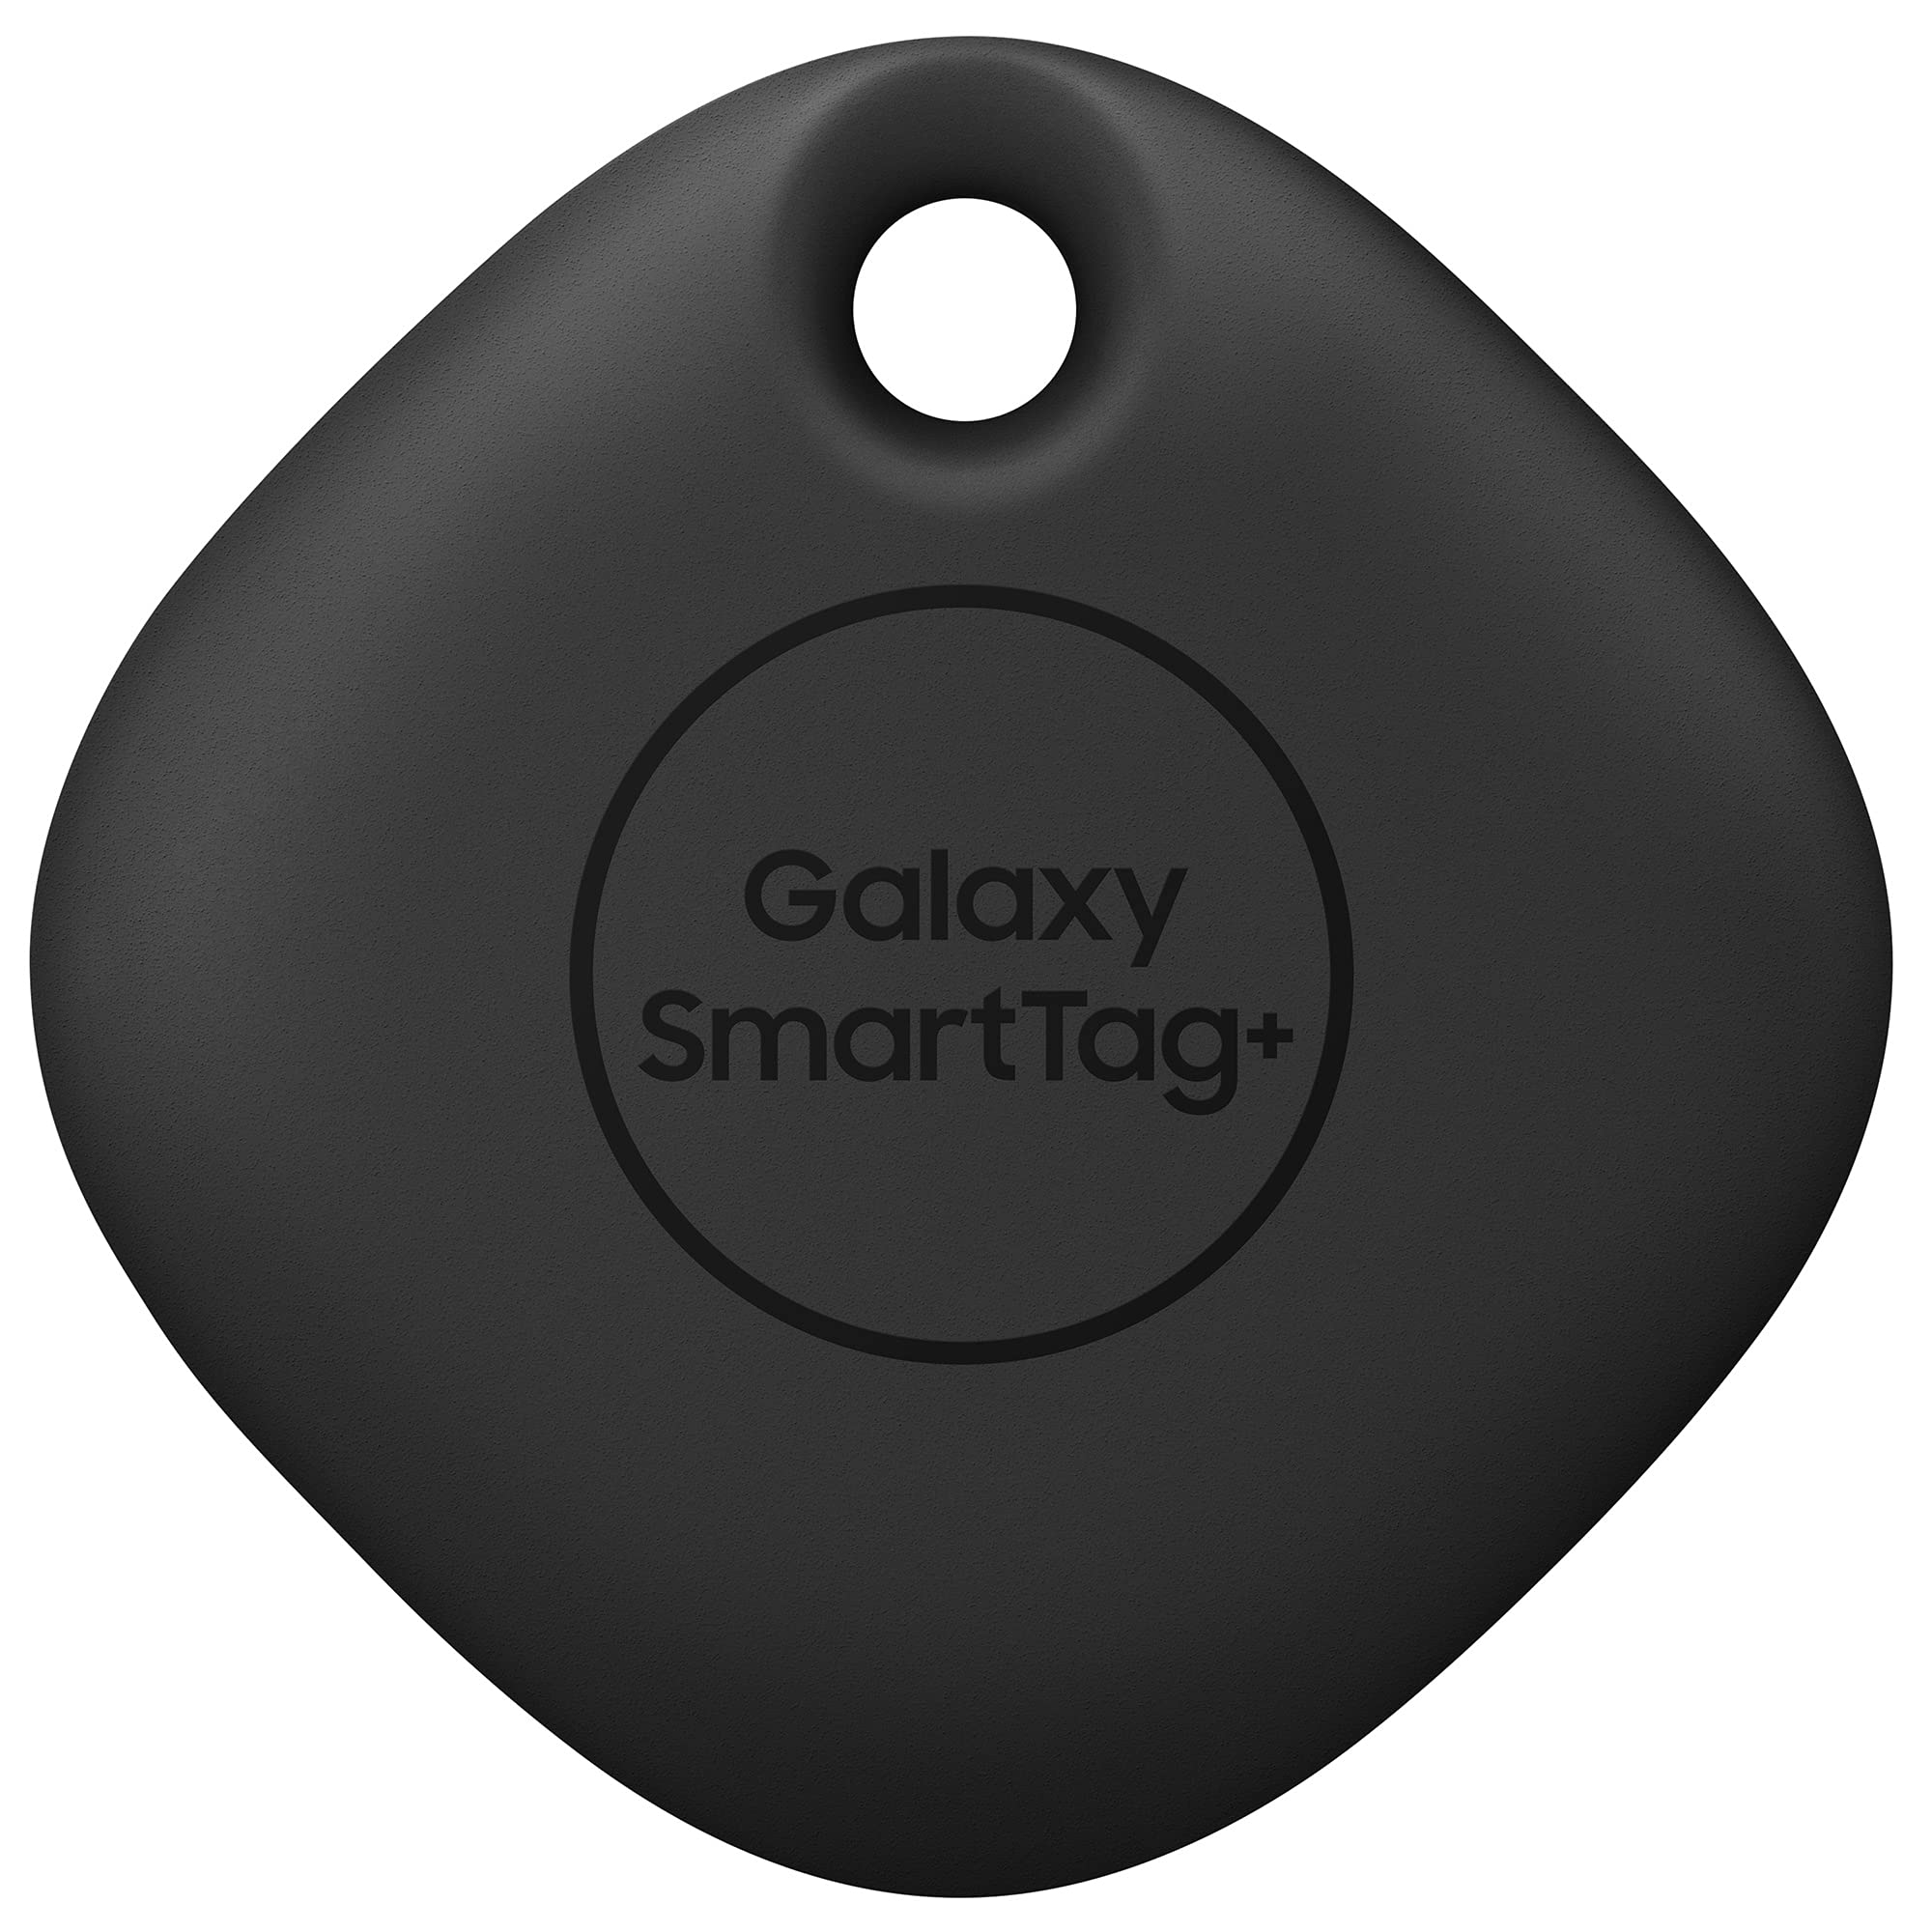 Samsung Galaxy SmartTag+ with Ultra-Wideband and Augmented Reality Finding, Bluetooth Item Finder and Key Finder, 120 m Findign Range, 1 Pack, Black (UK Version)